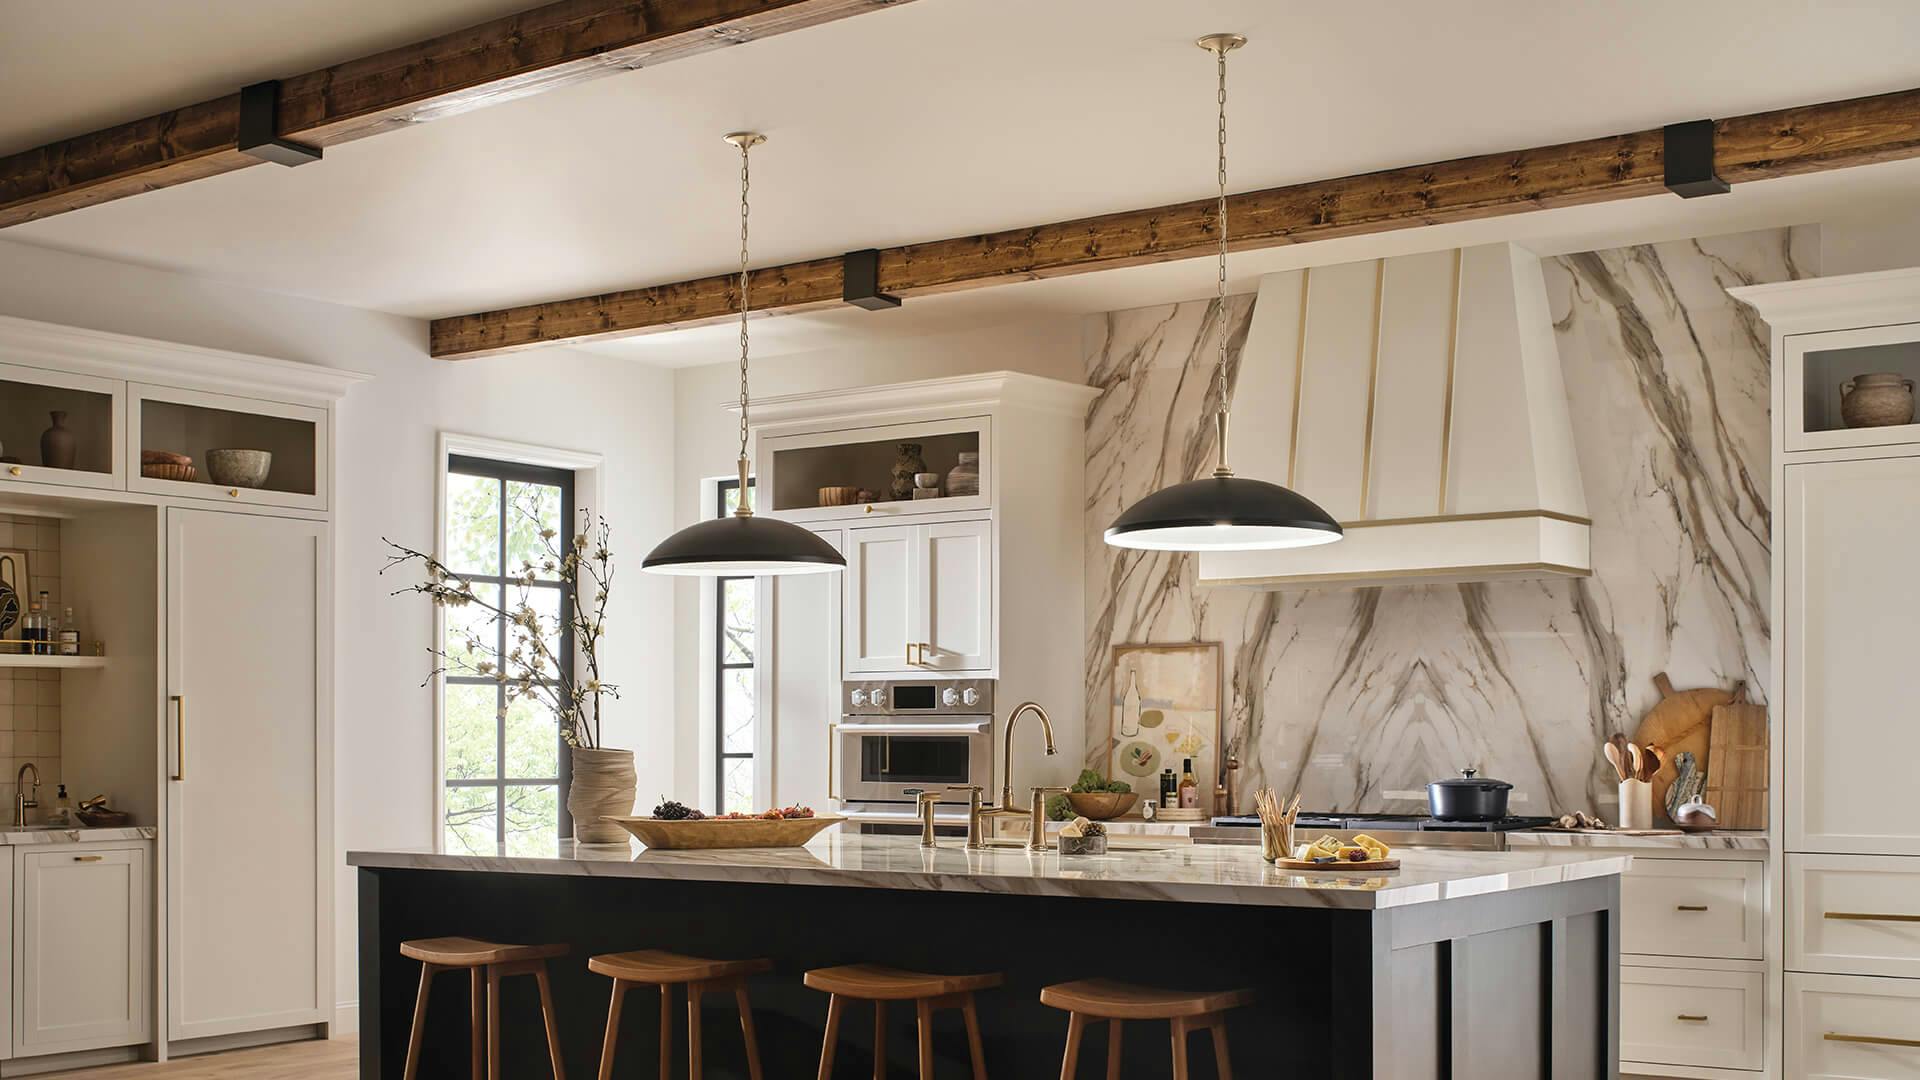 Two black Delarosa pendants hanging above a black island with marble counters